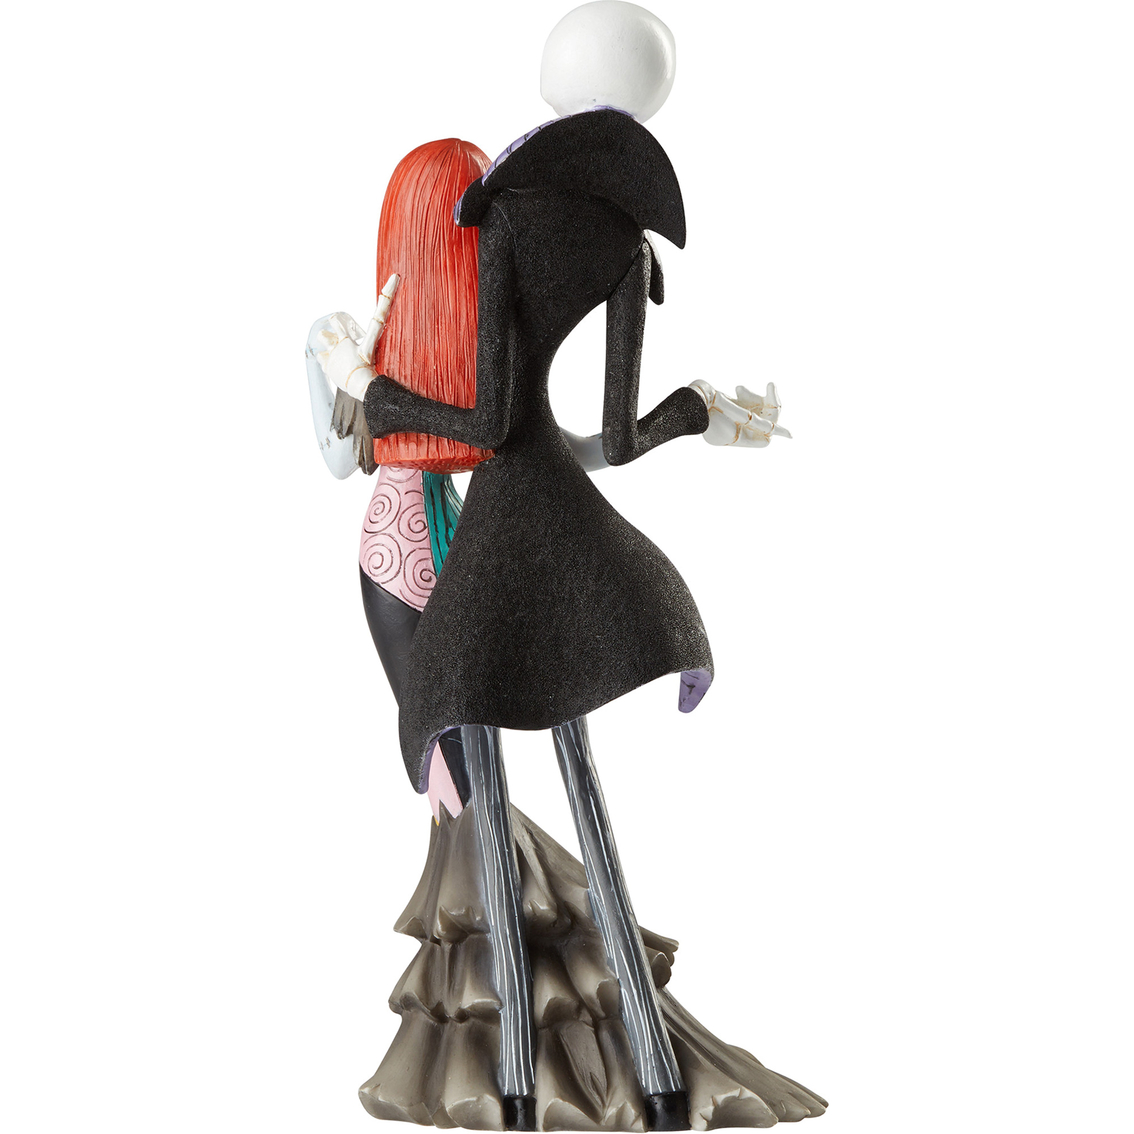 Disney Showcase Deluxe Jack and Sally - Image 2 of 2